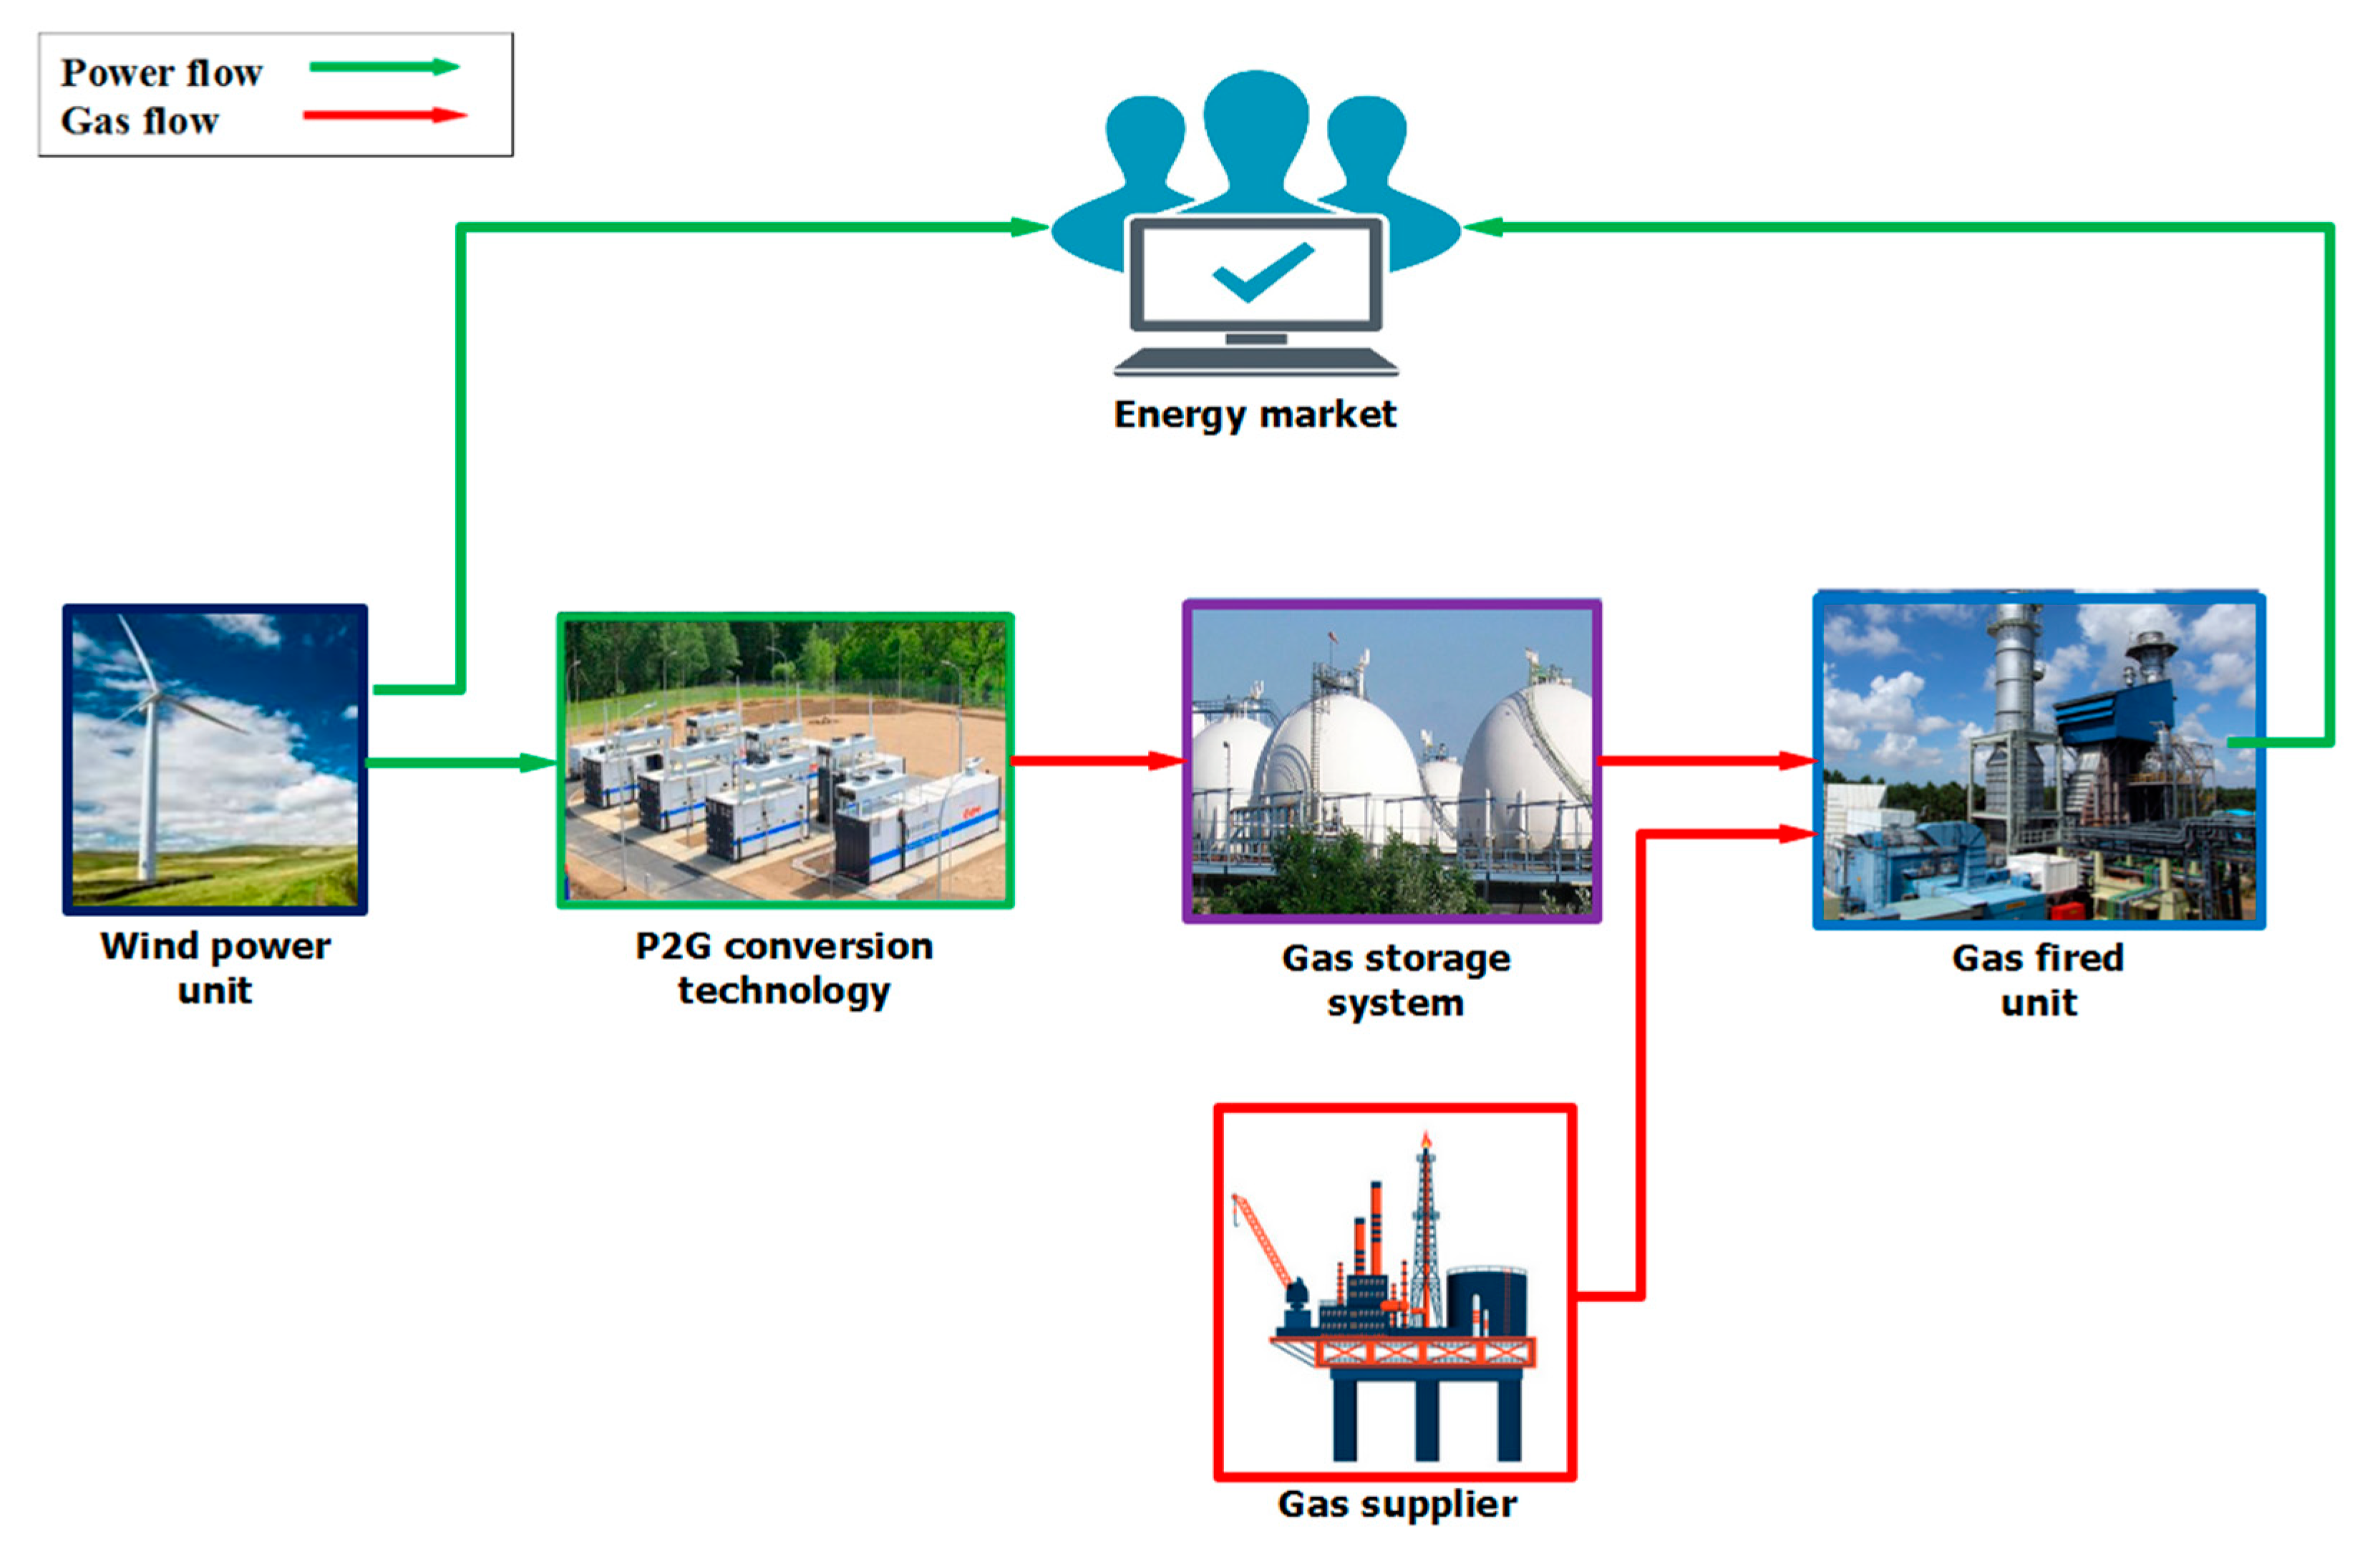 Energies Free Full Text Robust Optimal Operation Strategy For A Hybrid Energy System Based On Gas Fired Unit Power To Gas Facility And Wind Power In Energy Markets Html